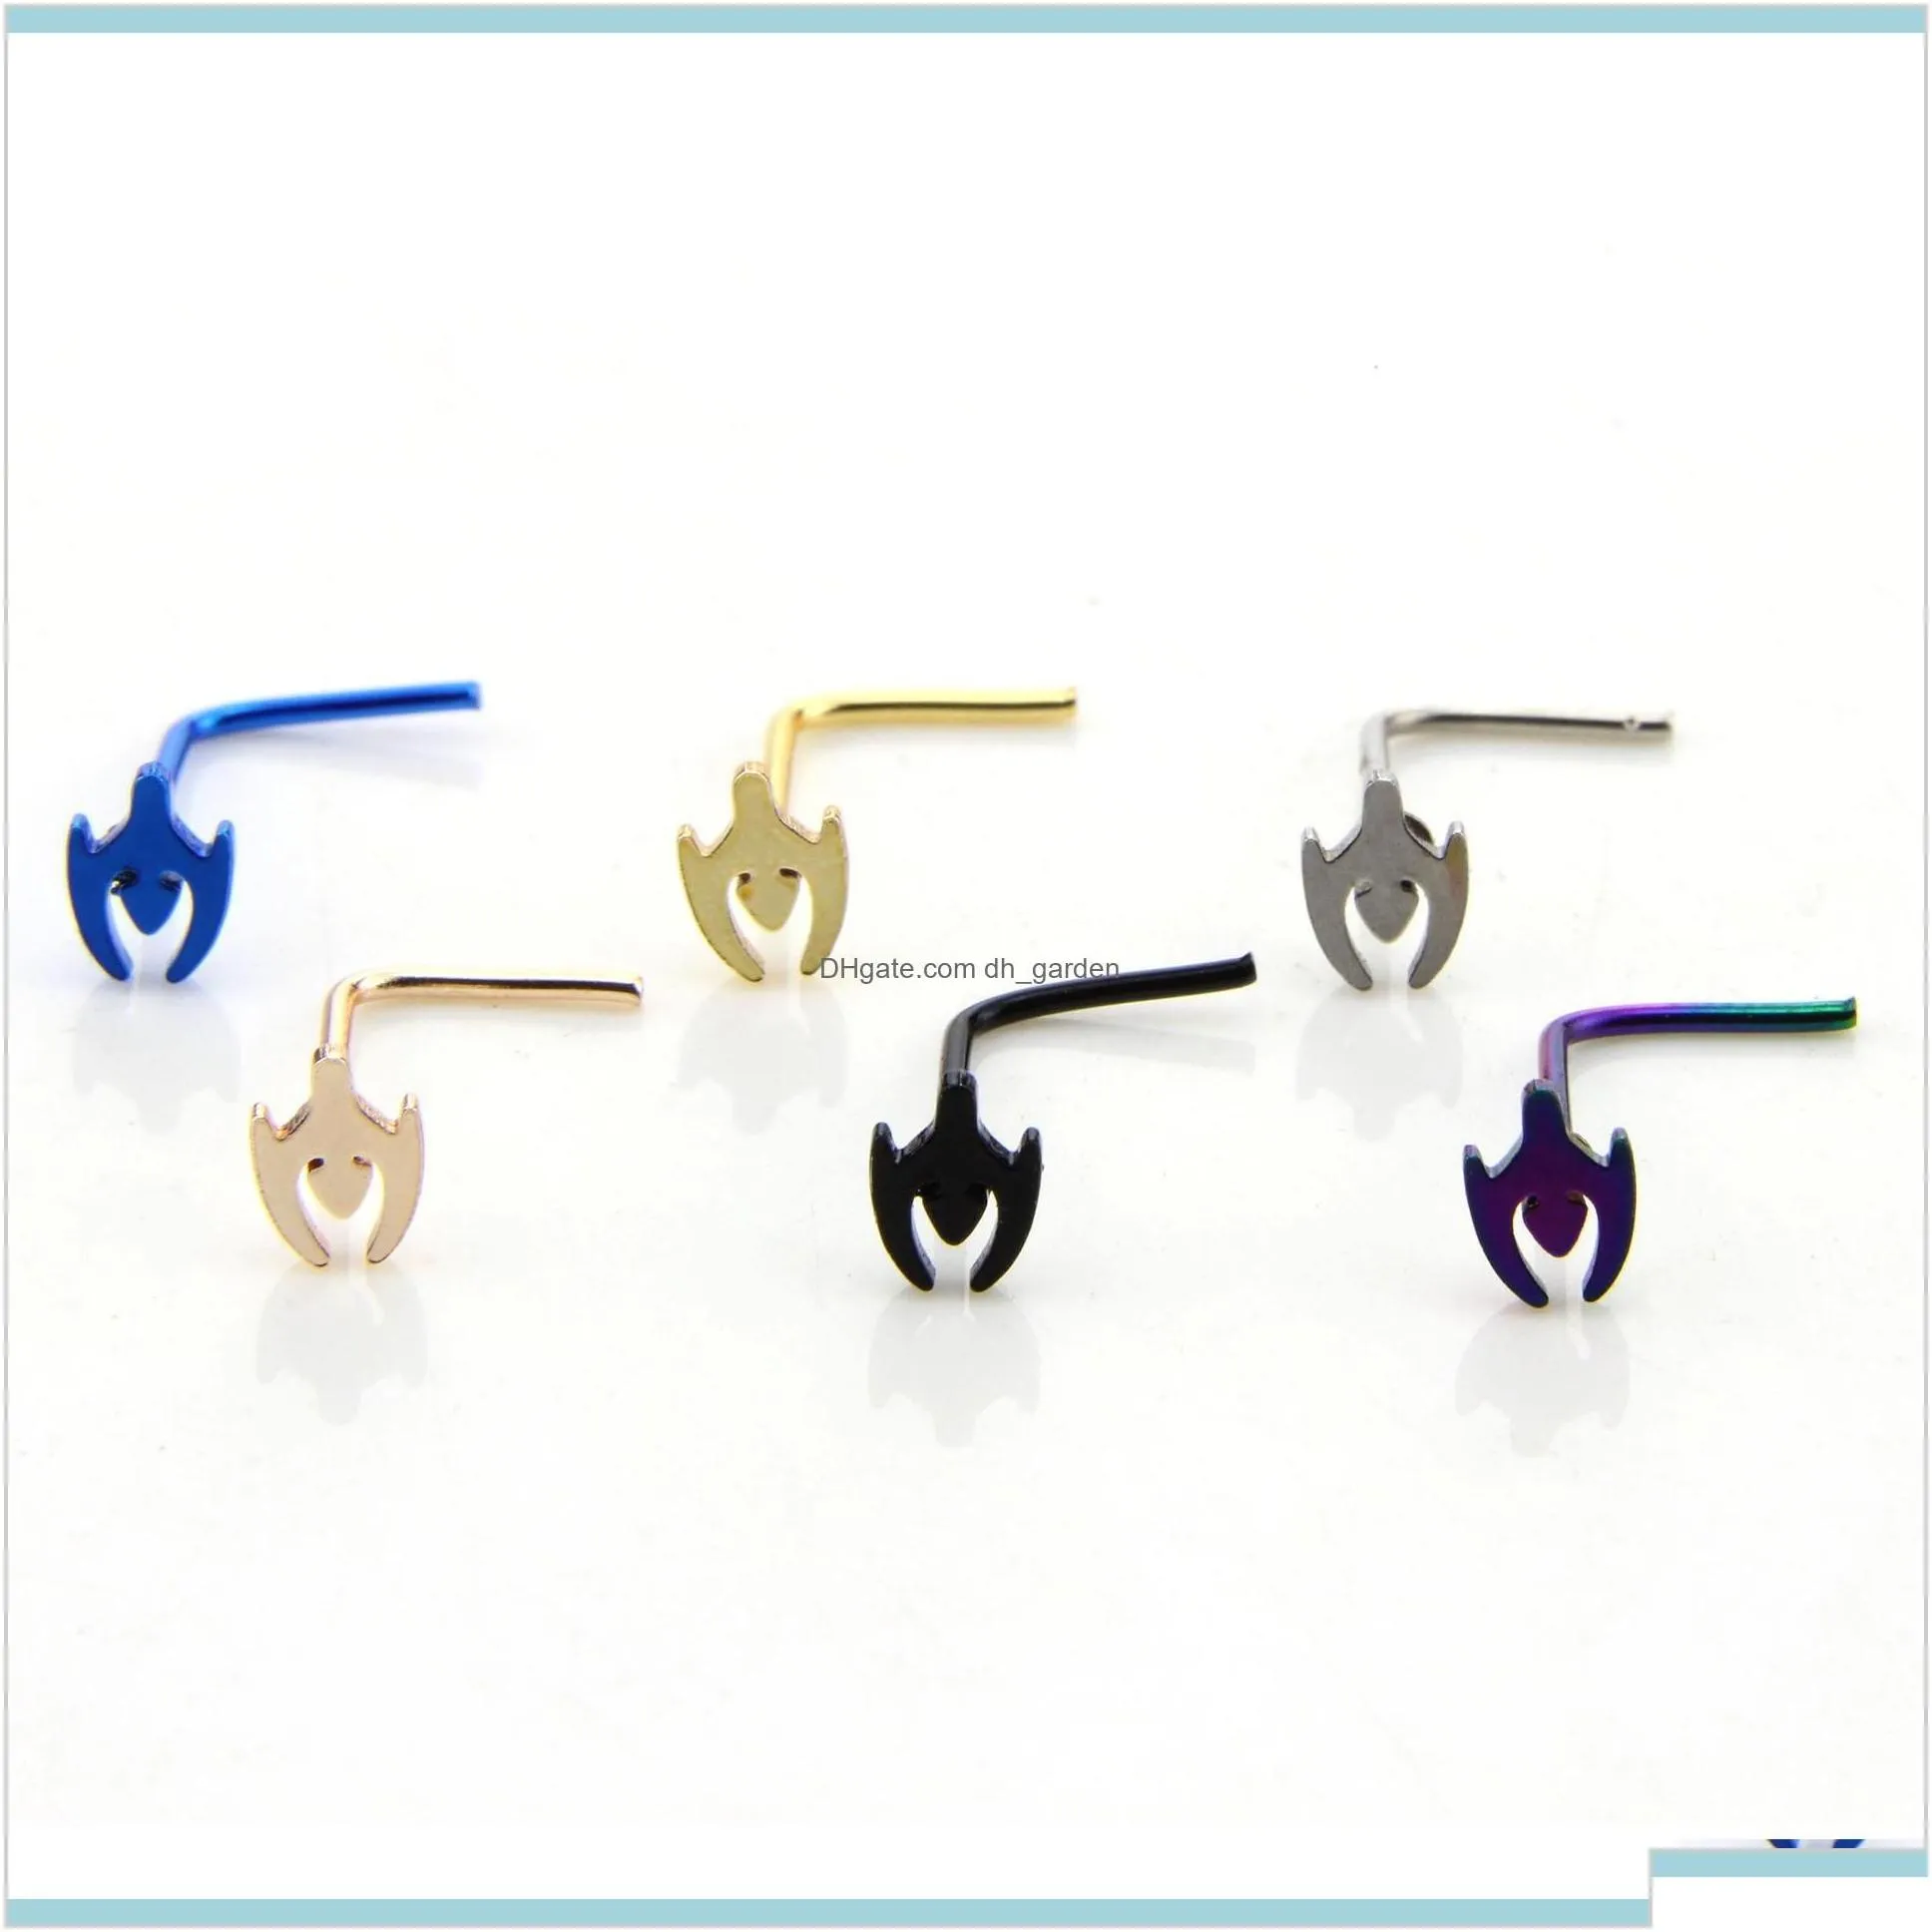 8 Styles 316L Surgical Steel L Shaped Stud Maple Spider Skull Head Ring Piercing 6Pcs Lot Xlxyl Rings Studs Ax1Gr